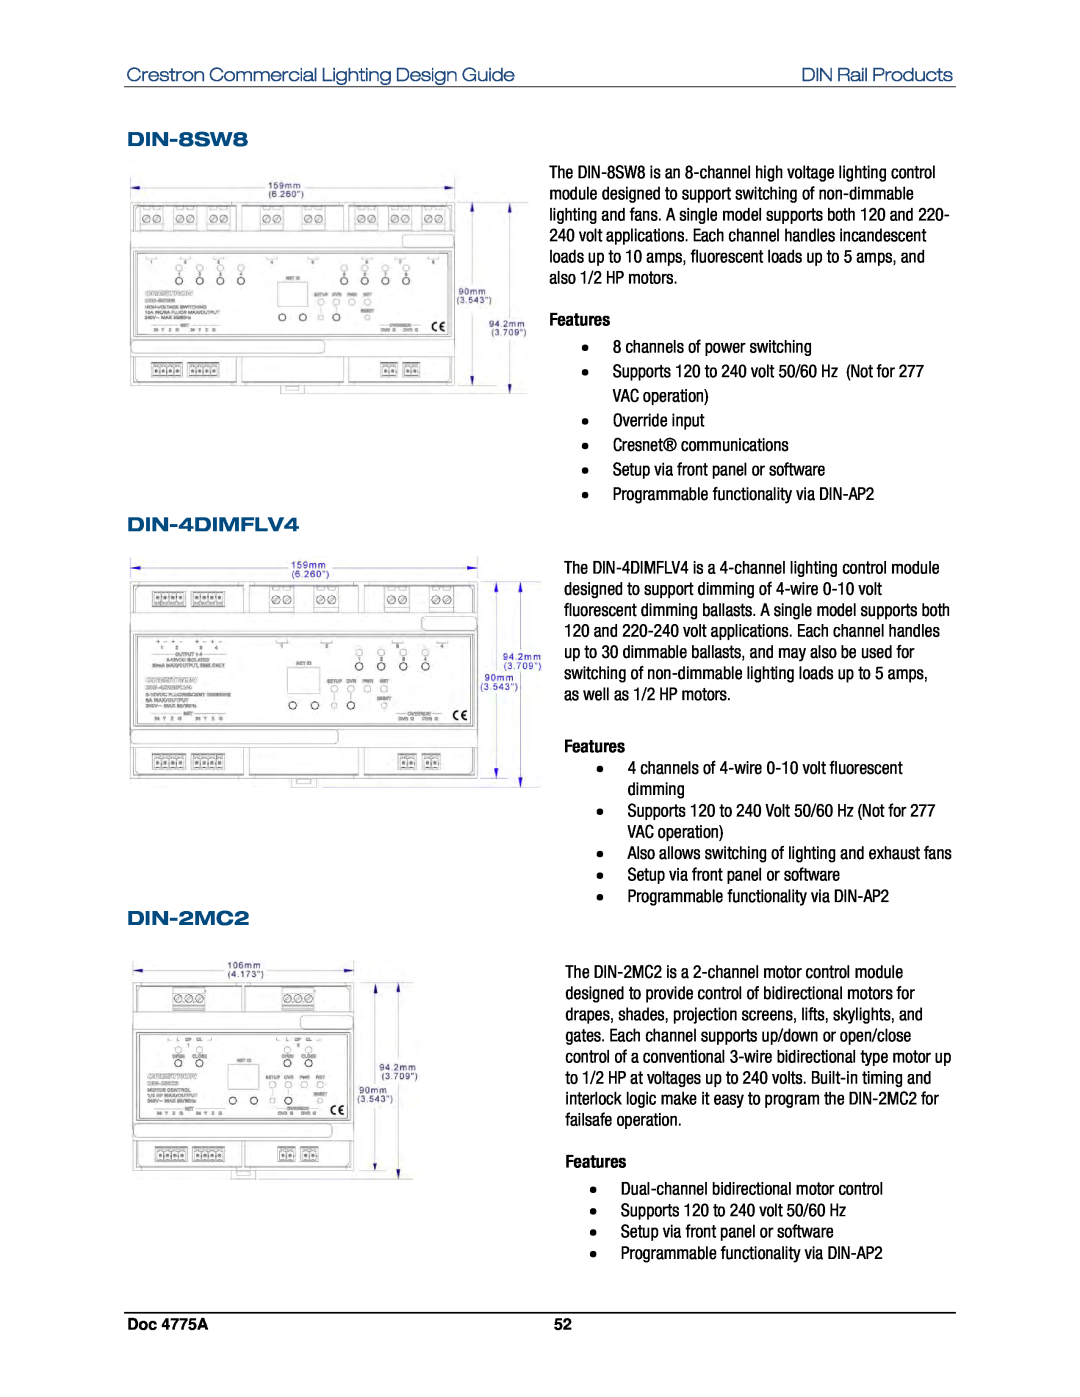 Crestron electronic GLPS-SW-FT manual DIN-8SW8, DIN-4DIMFLV4, DIN-2MC2, Crestron Commercial Lighting Design Guide, Features 